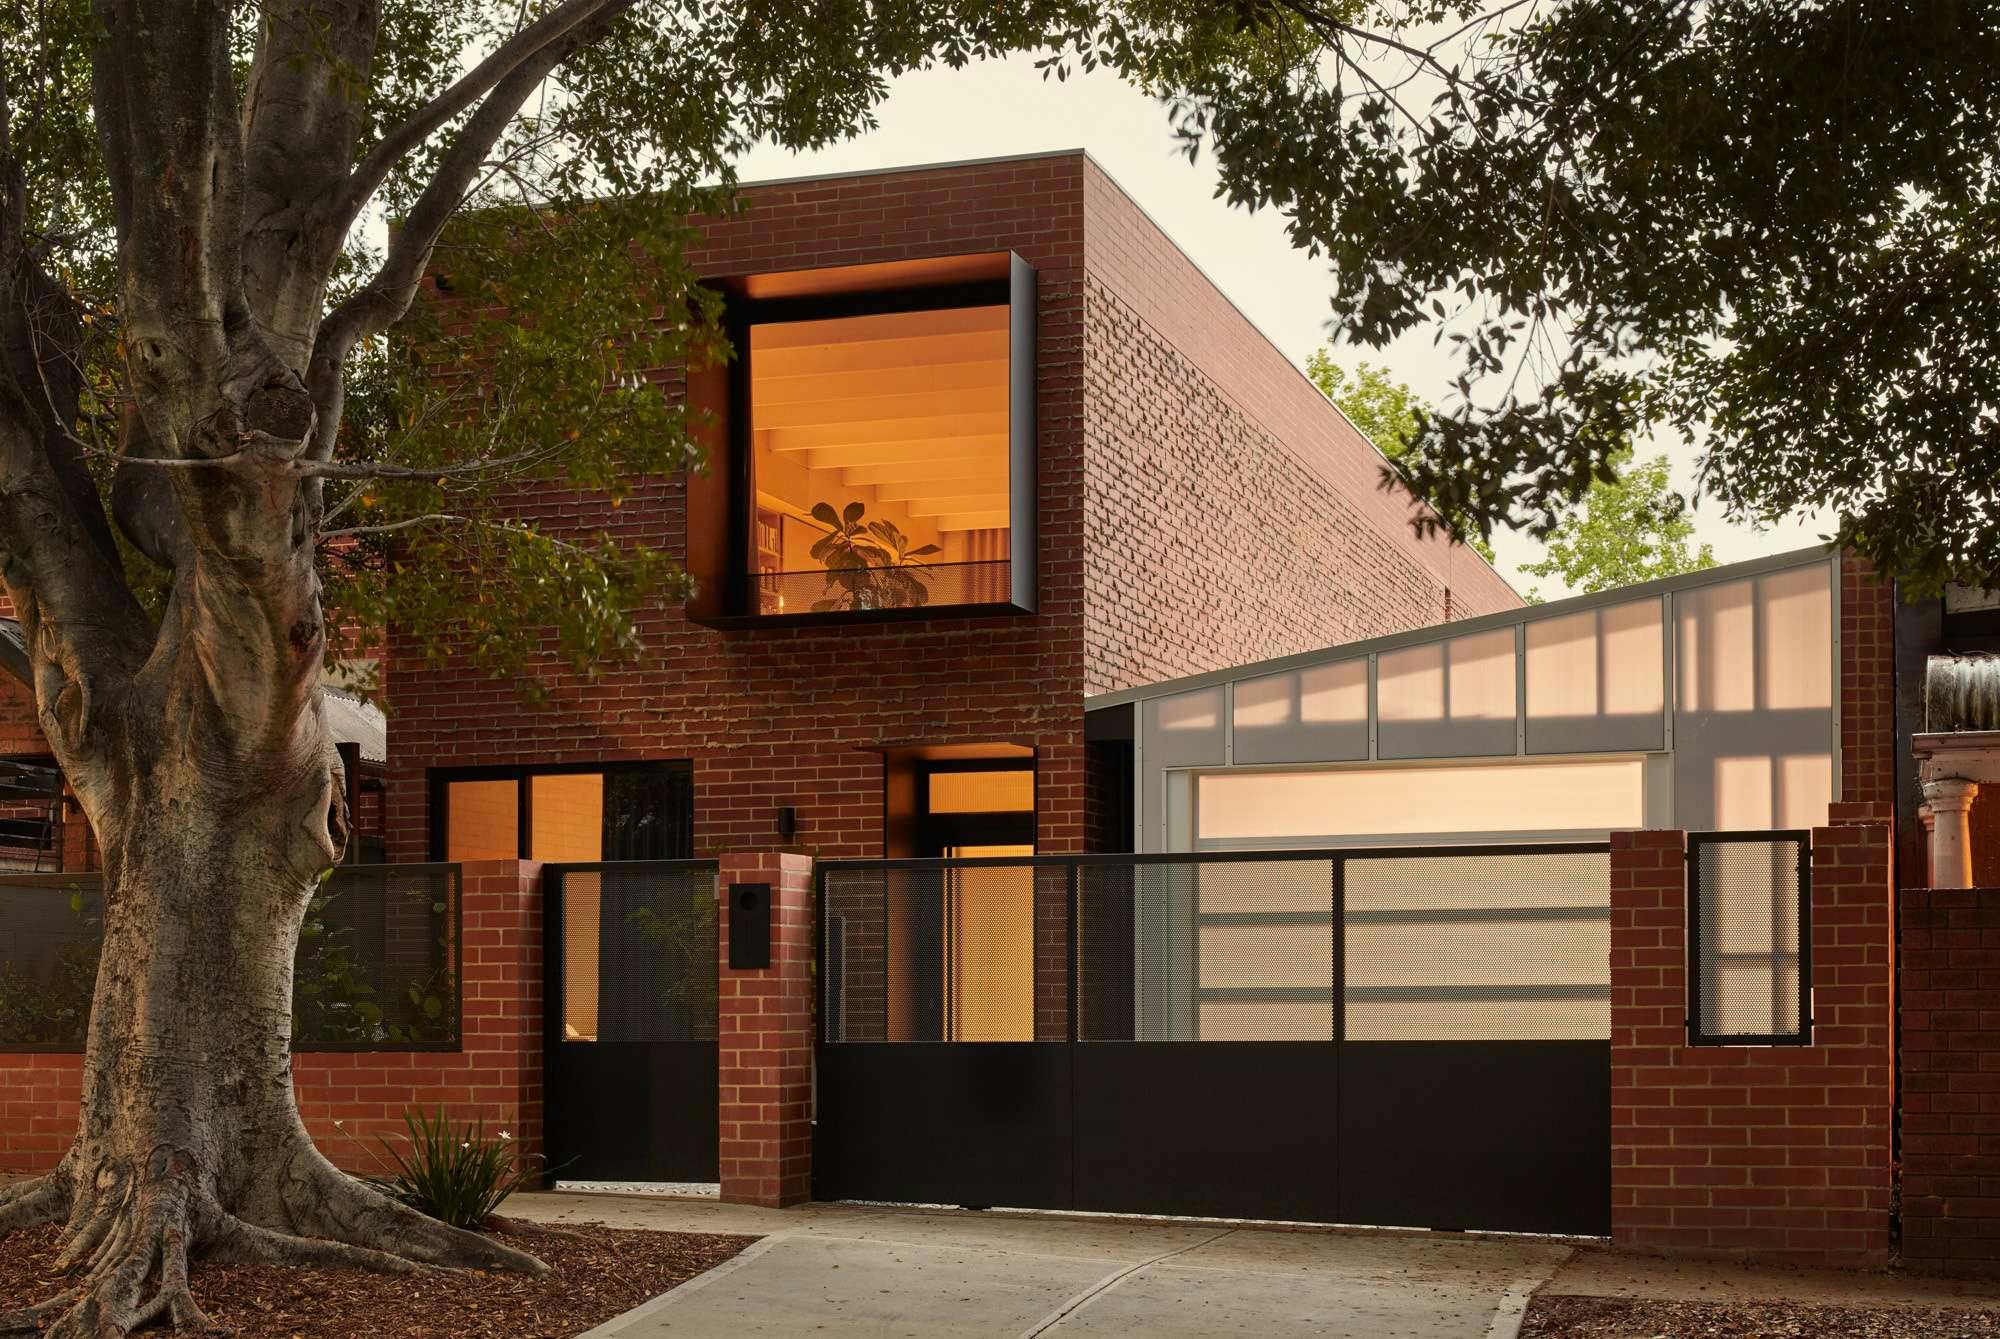 Brick House by Studio Roam. Photography by Jack Lovel. Street facade of double storey brick home with warm light emitting windows. 